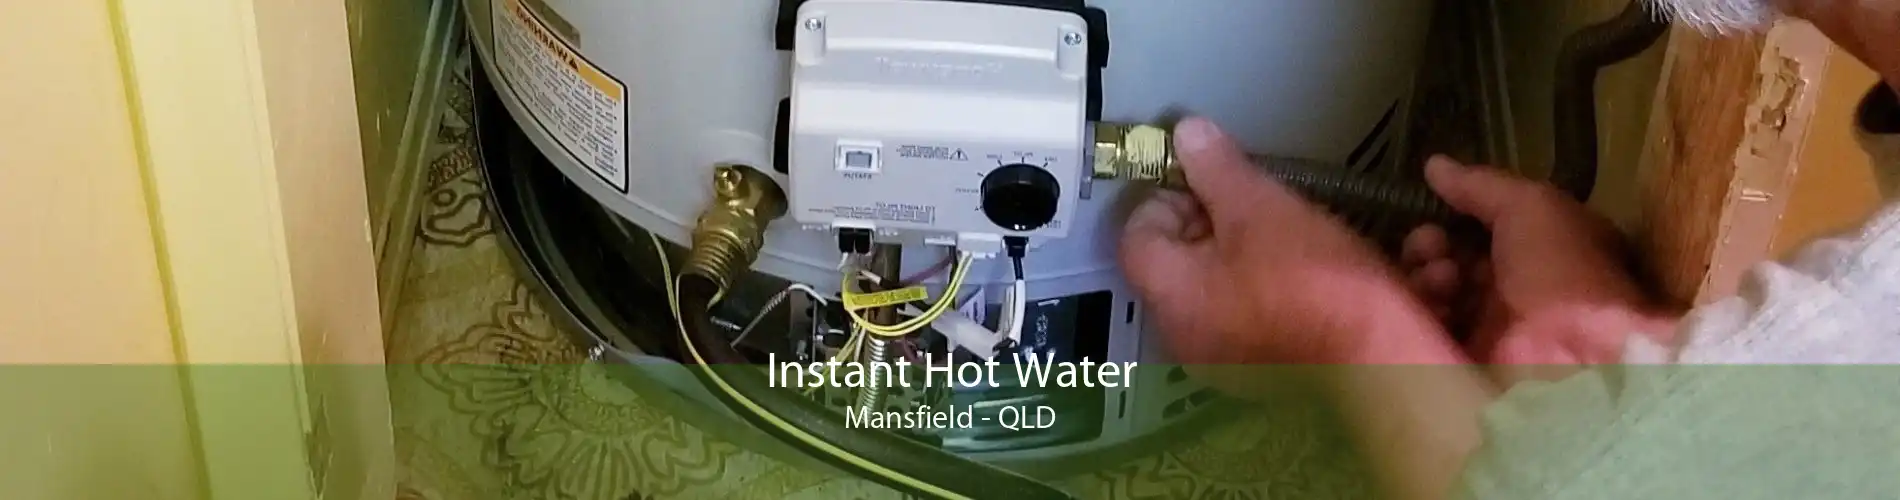 Instant Hot Water Mansfield - QLD